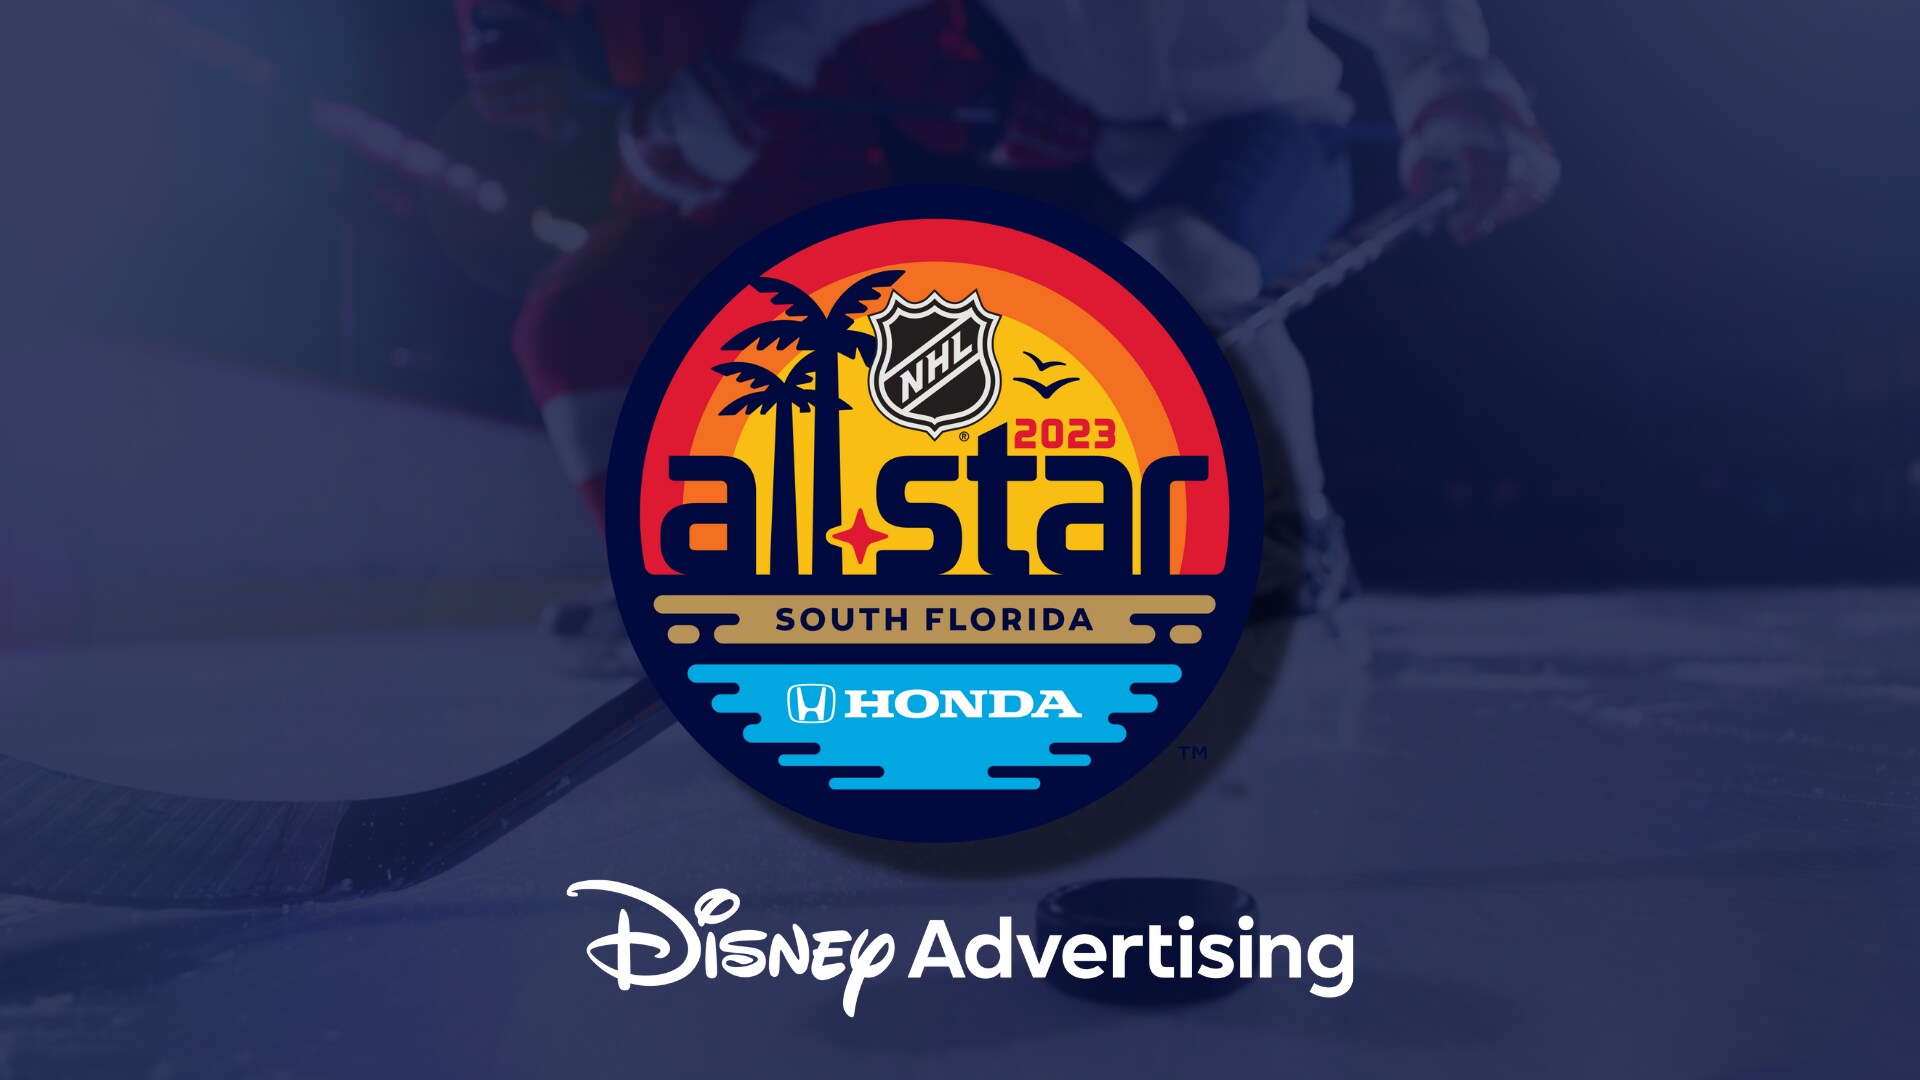 Disney Advertising Takes Ice with Sold-Out 2023 Honda NHL All-Star Game and 2023 NHL All-Star Skills Disney Advertising Press